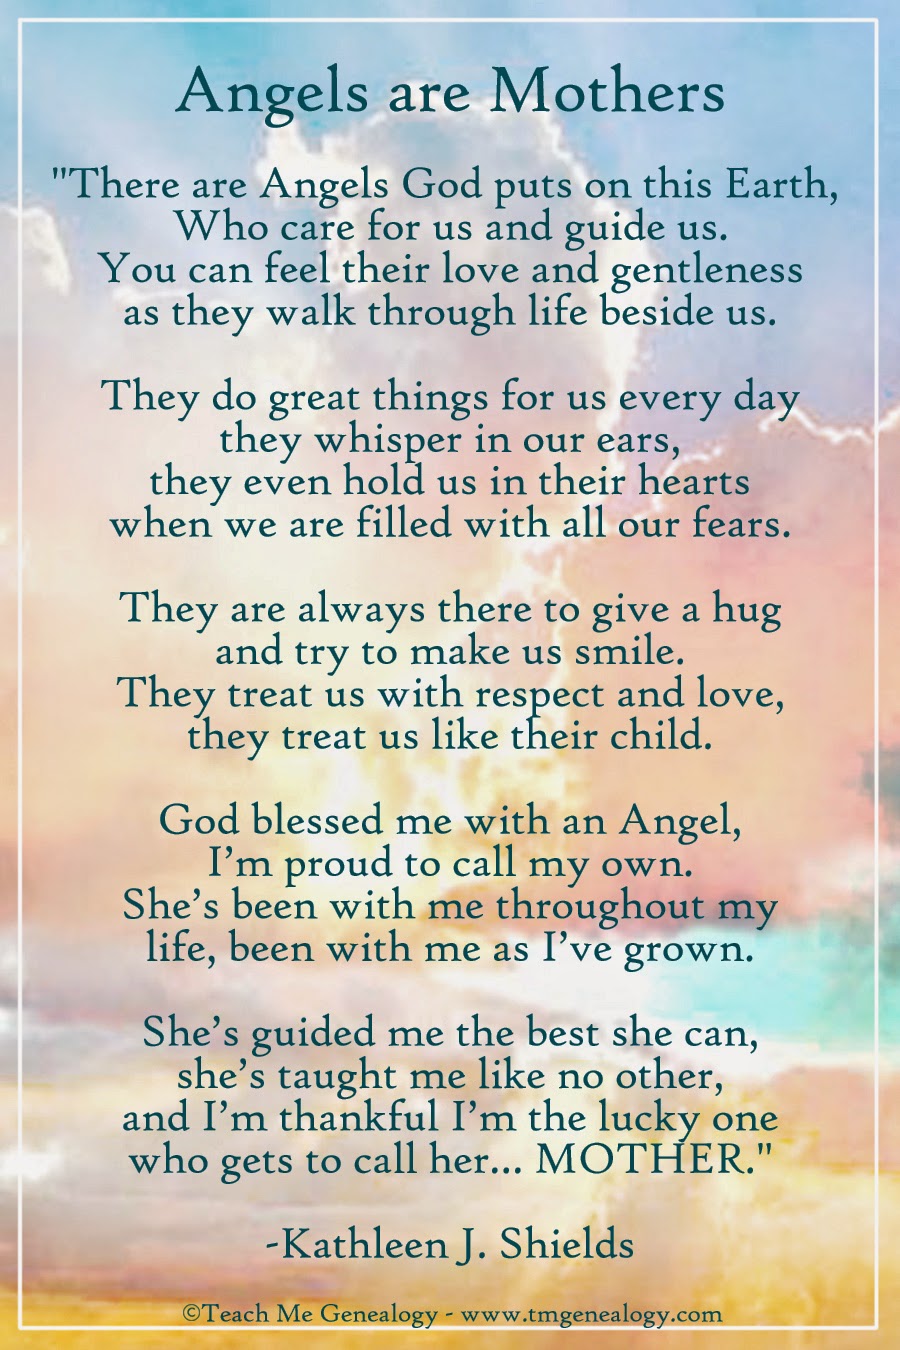 Angels Are Mothers Poem By Kathleen J. Shields ~ Teach Me Genealogy